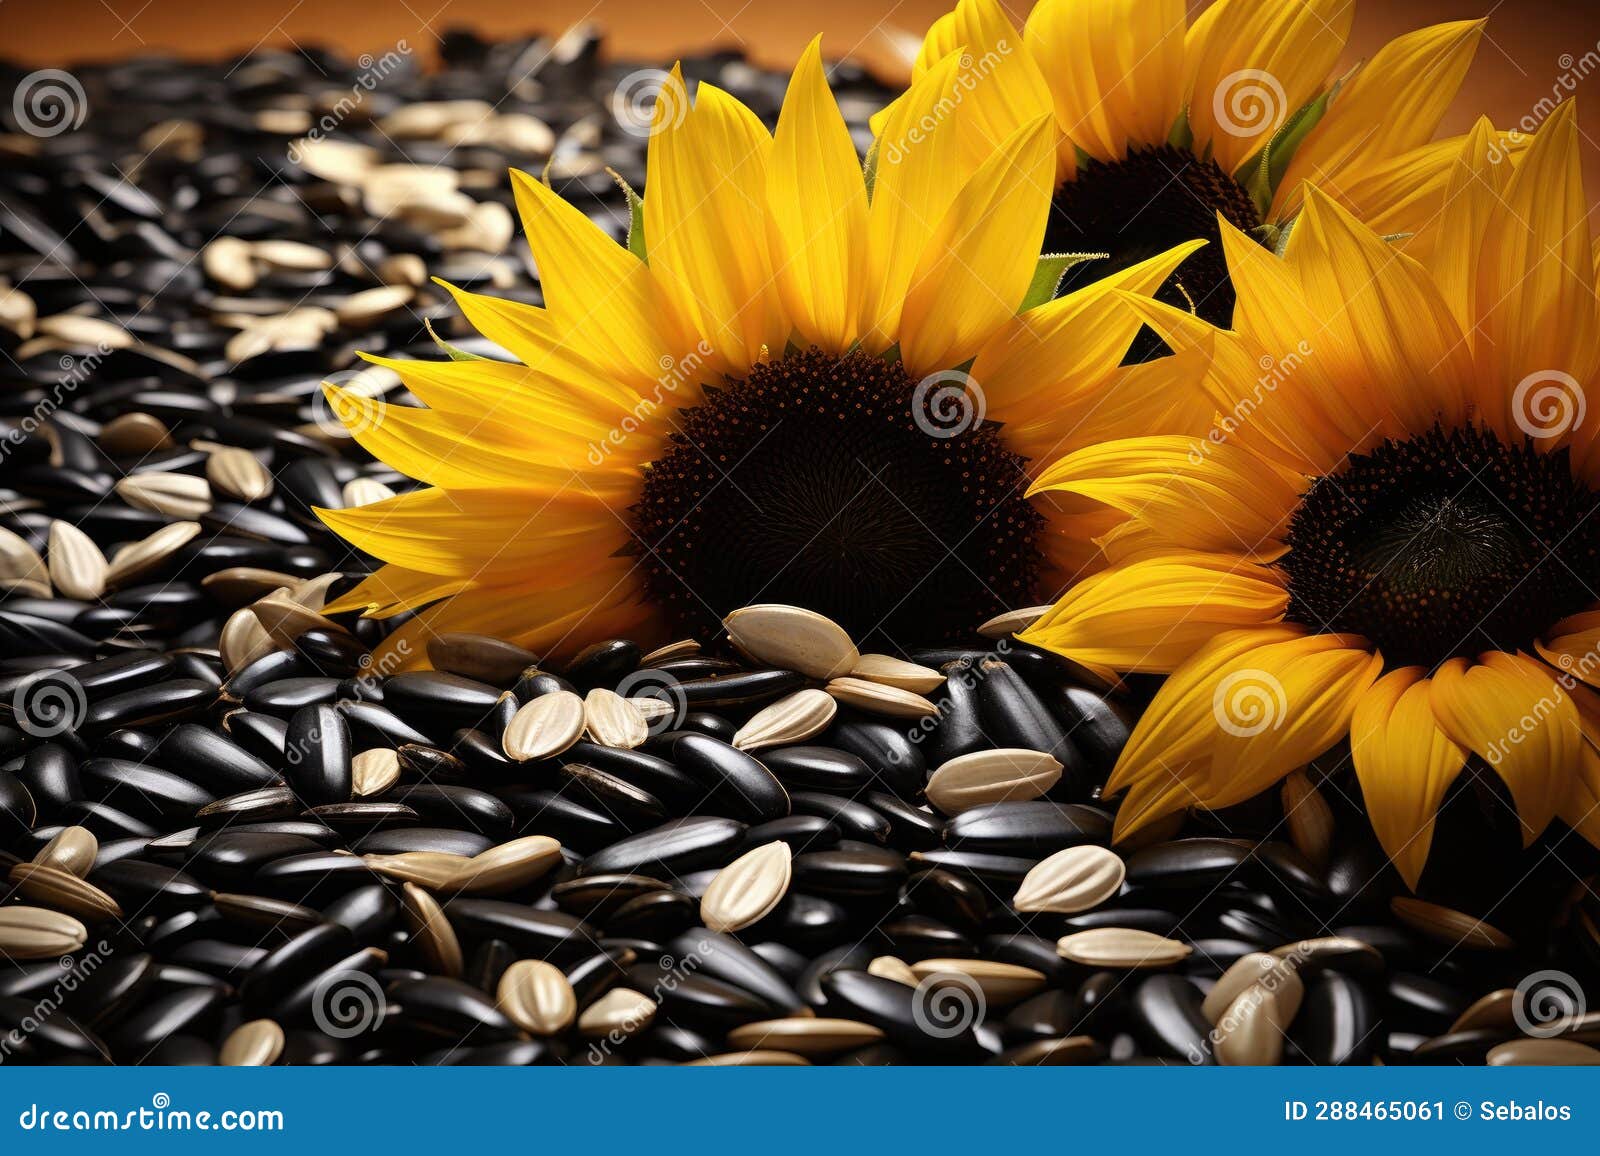 Sunflowers Sitting on Top of a Pile of Black Sunflower Seeds Stock ...